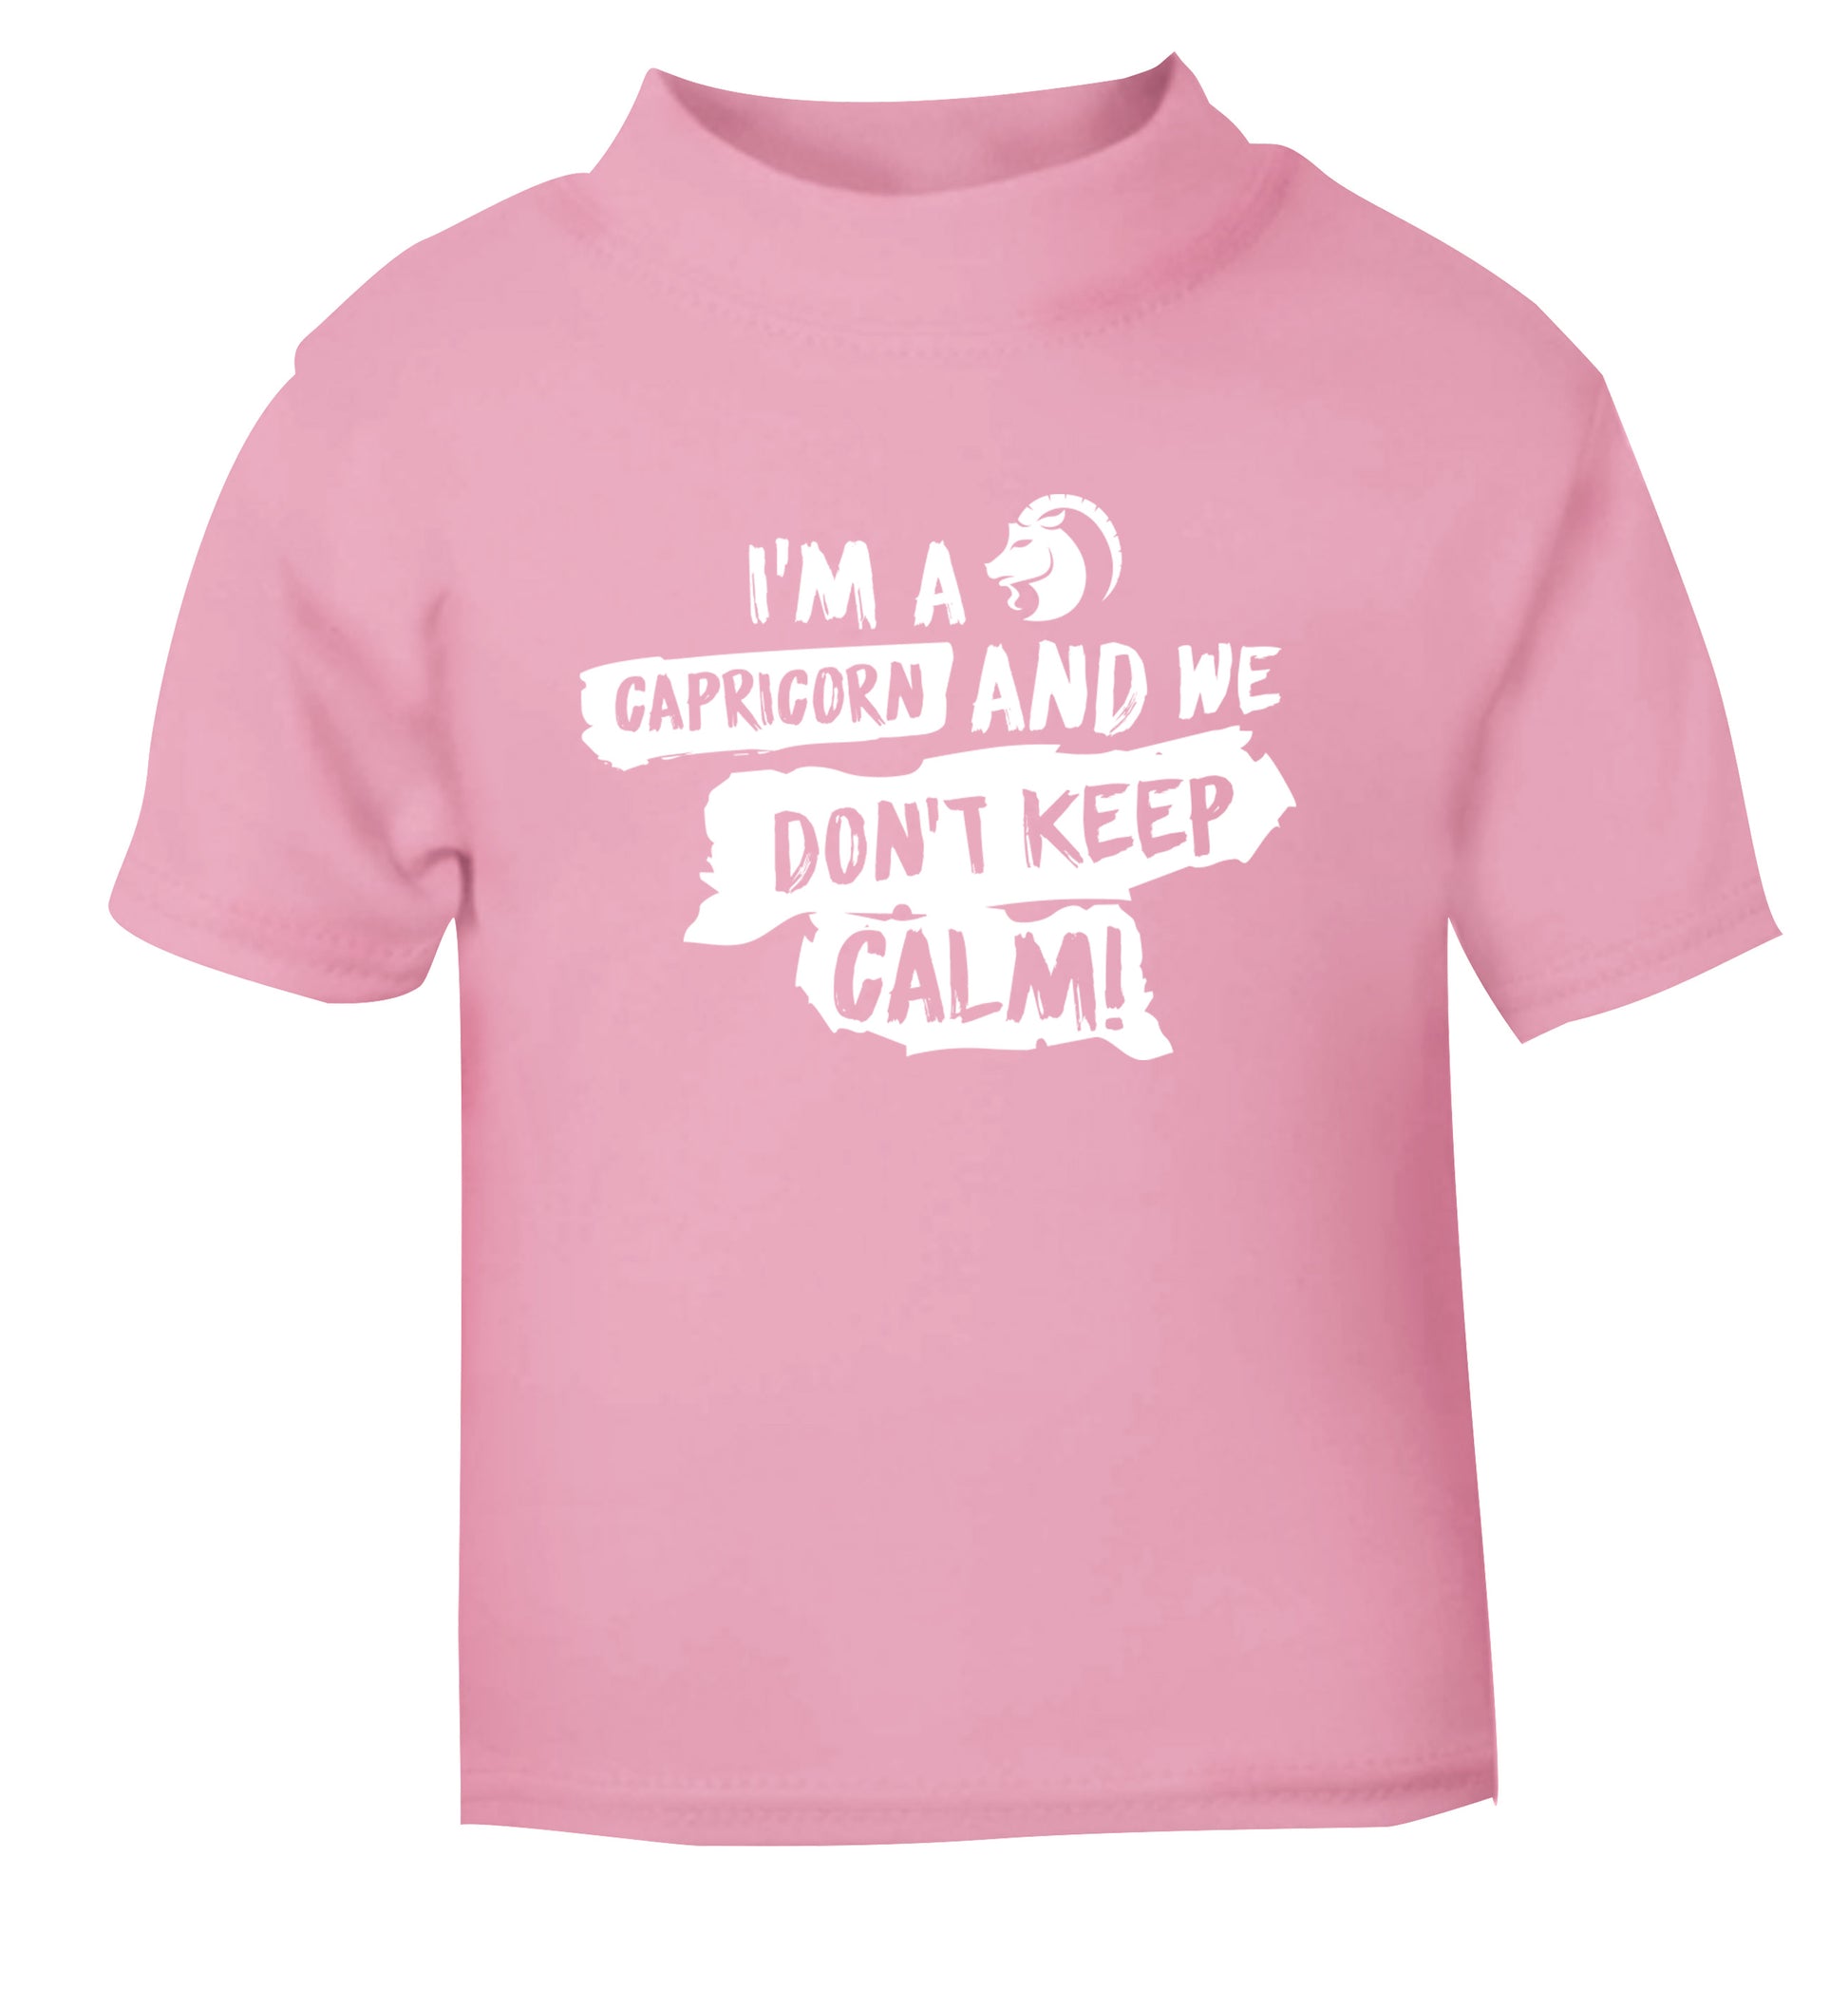 I'm a capricorn and we don't keep calm light pink Baby Toddler Tshirt 2 Years